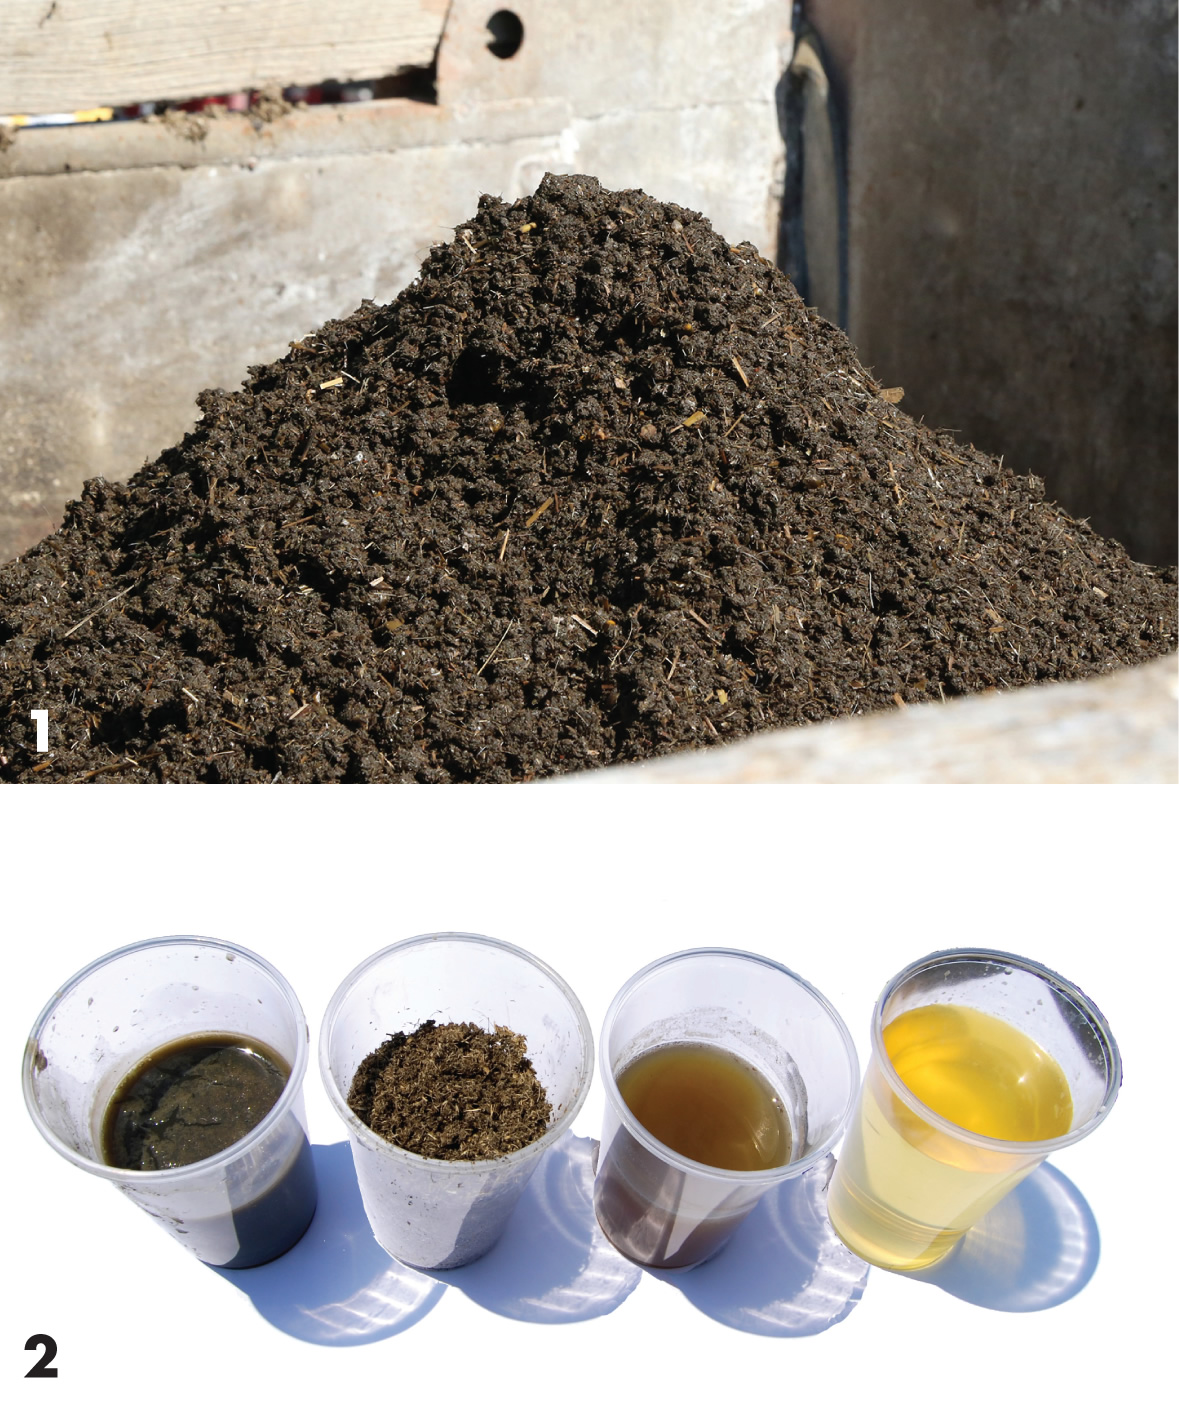 Separated solids with high P levels (1). Samples (2) after each stage of the P recovery process (from left to right): slurry; solids after dewatering; liquids after dewatering; and final low P liquid product.